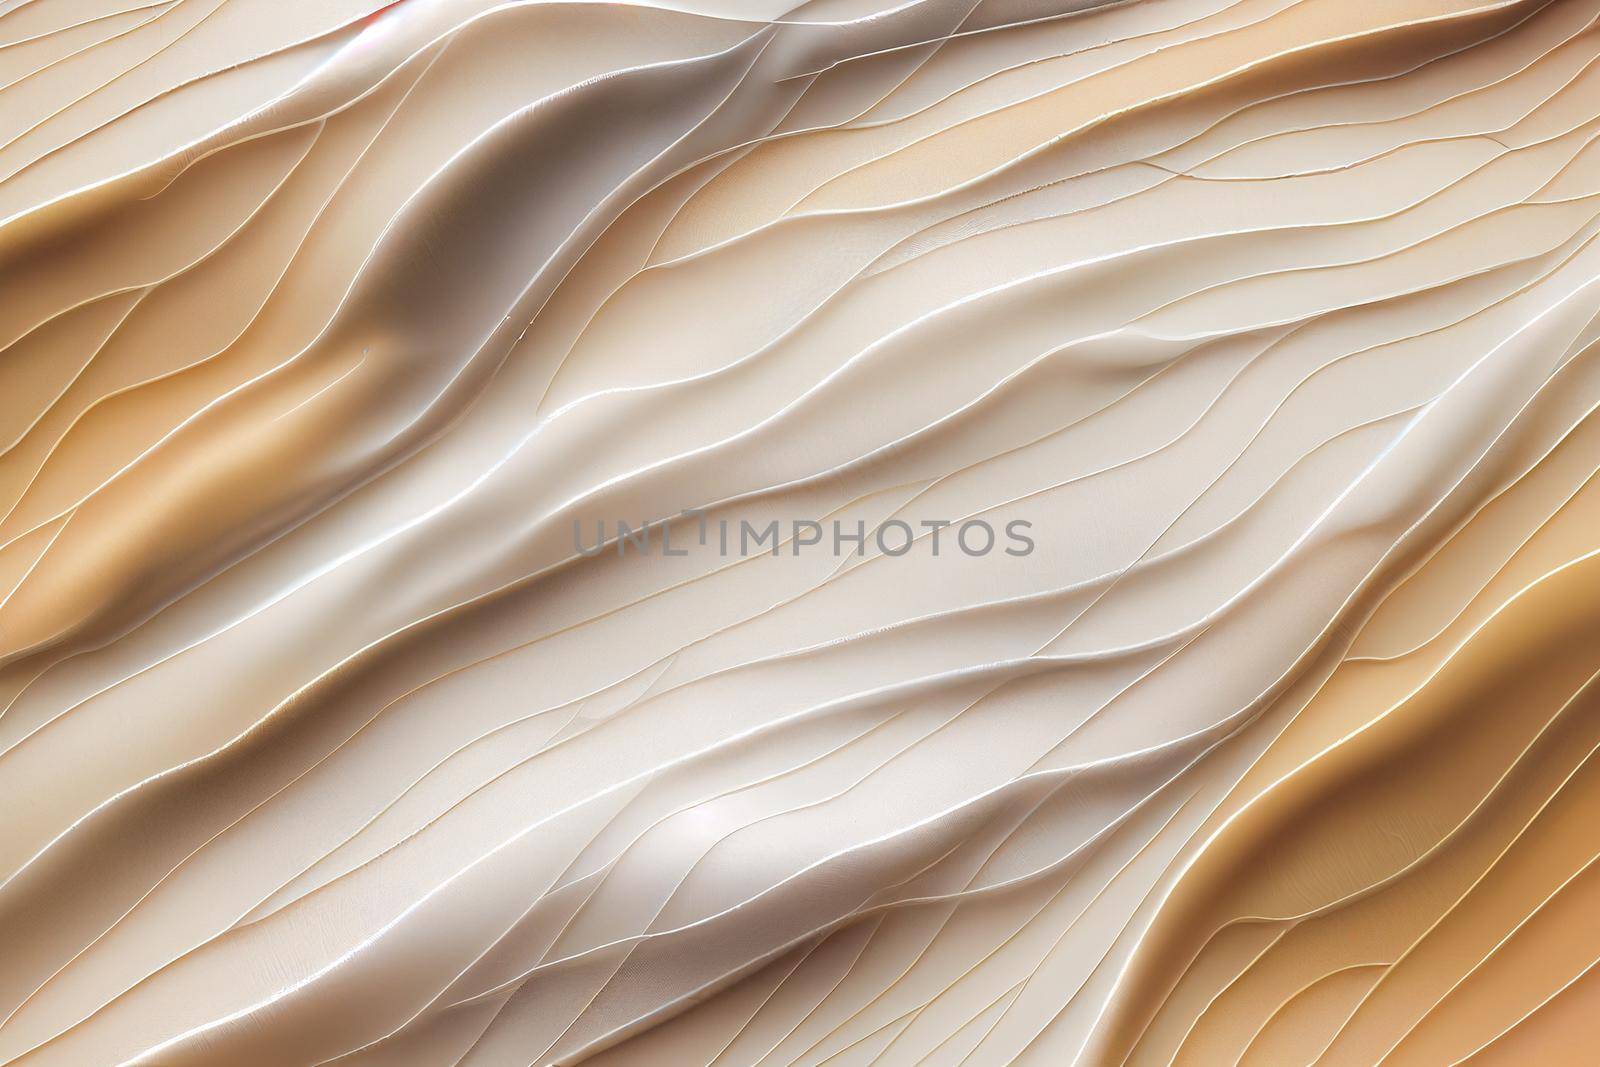 Undulating fabric creamy colors with complex texture. Silk fabric beige macro texture background. by FokasuArt